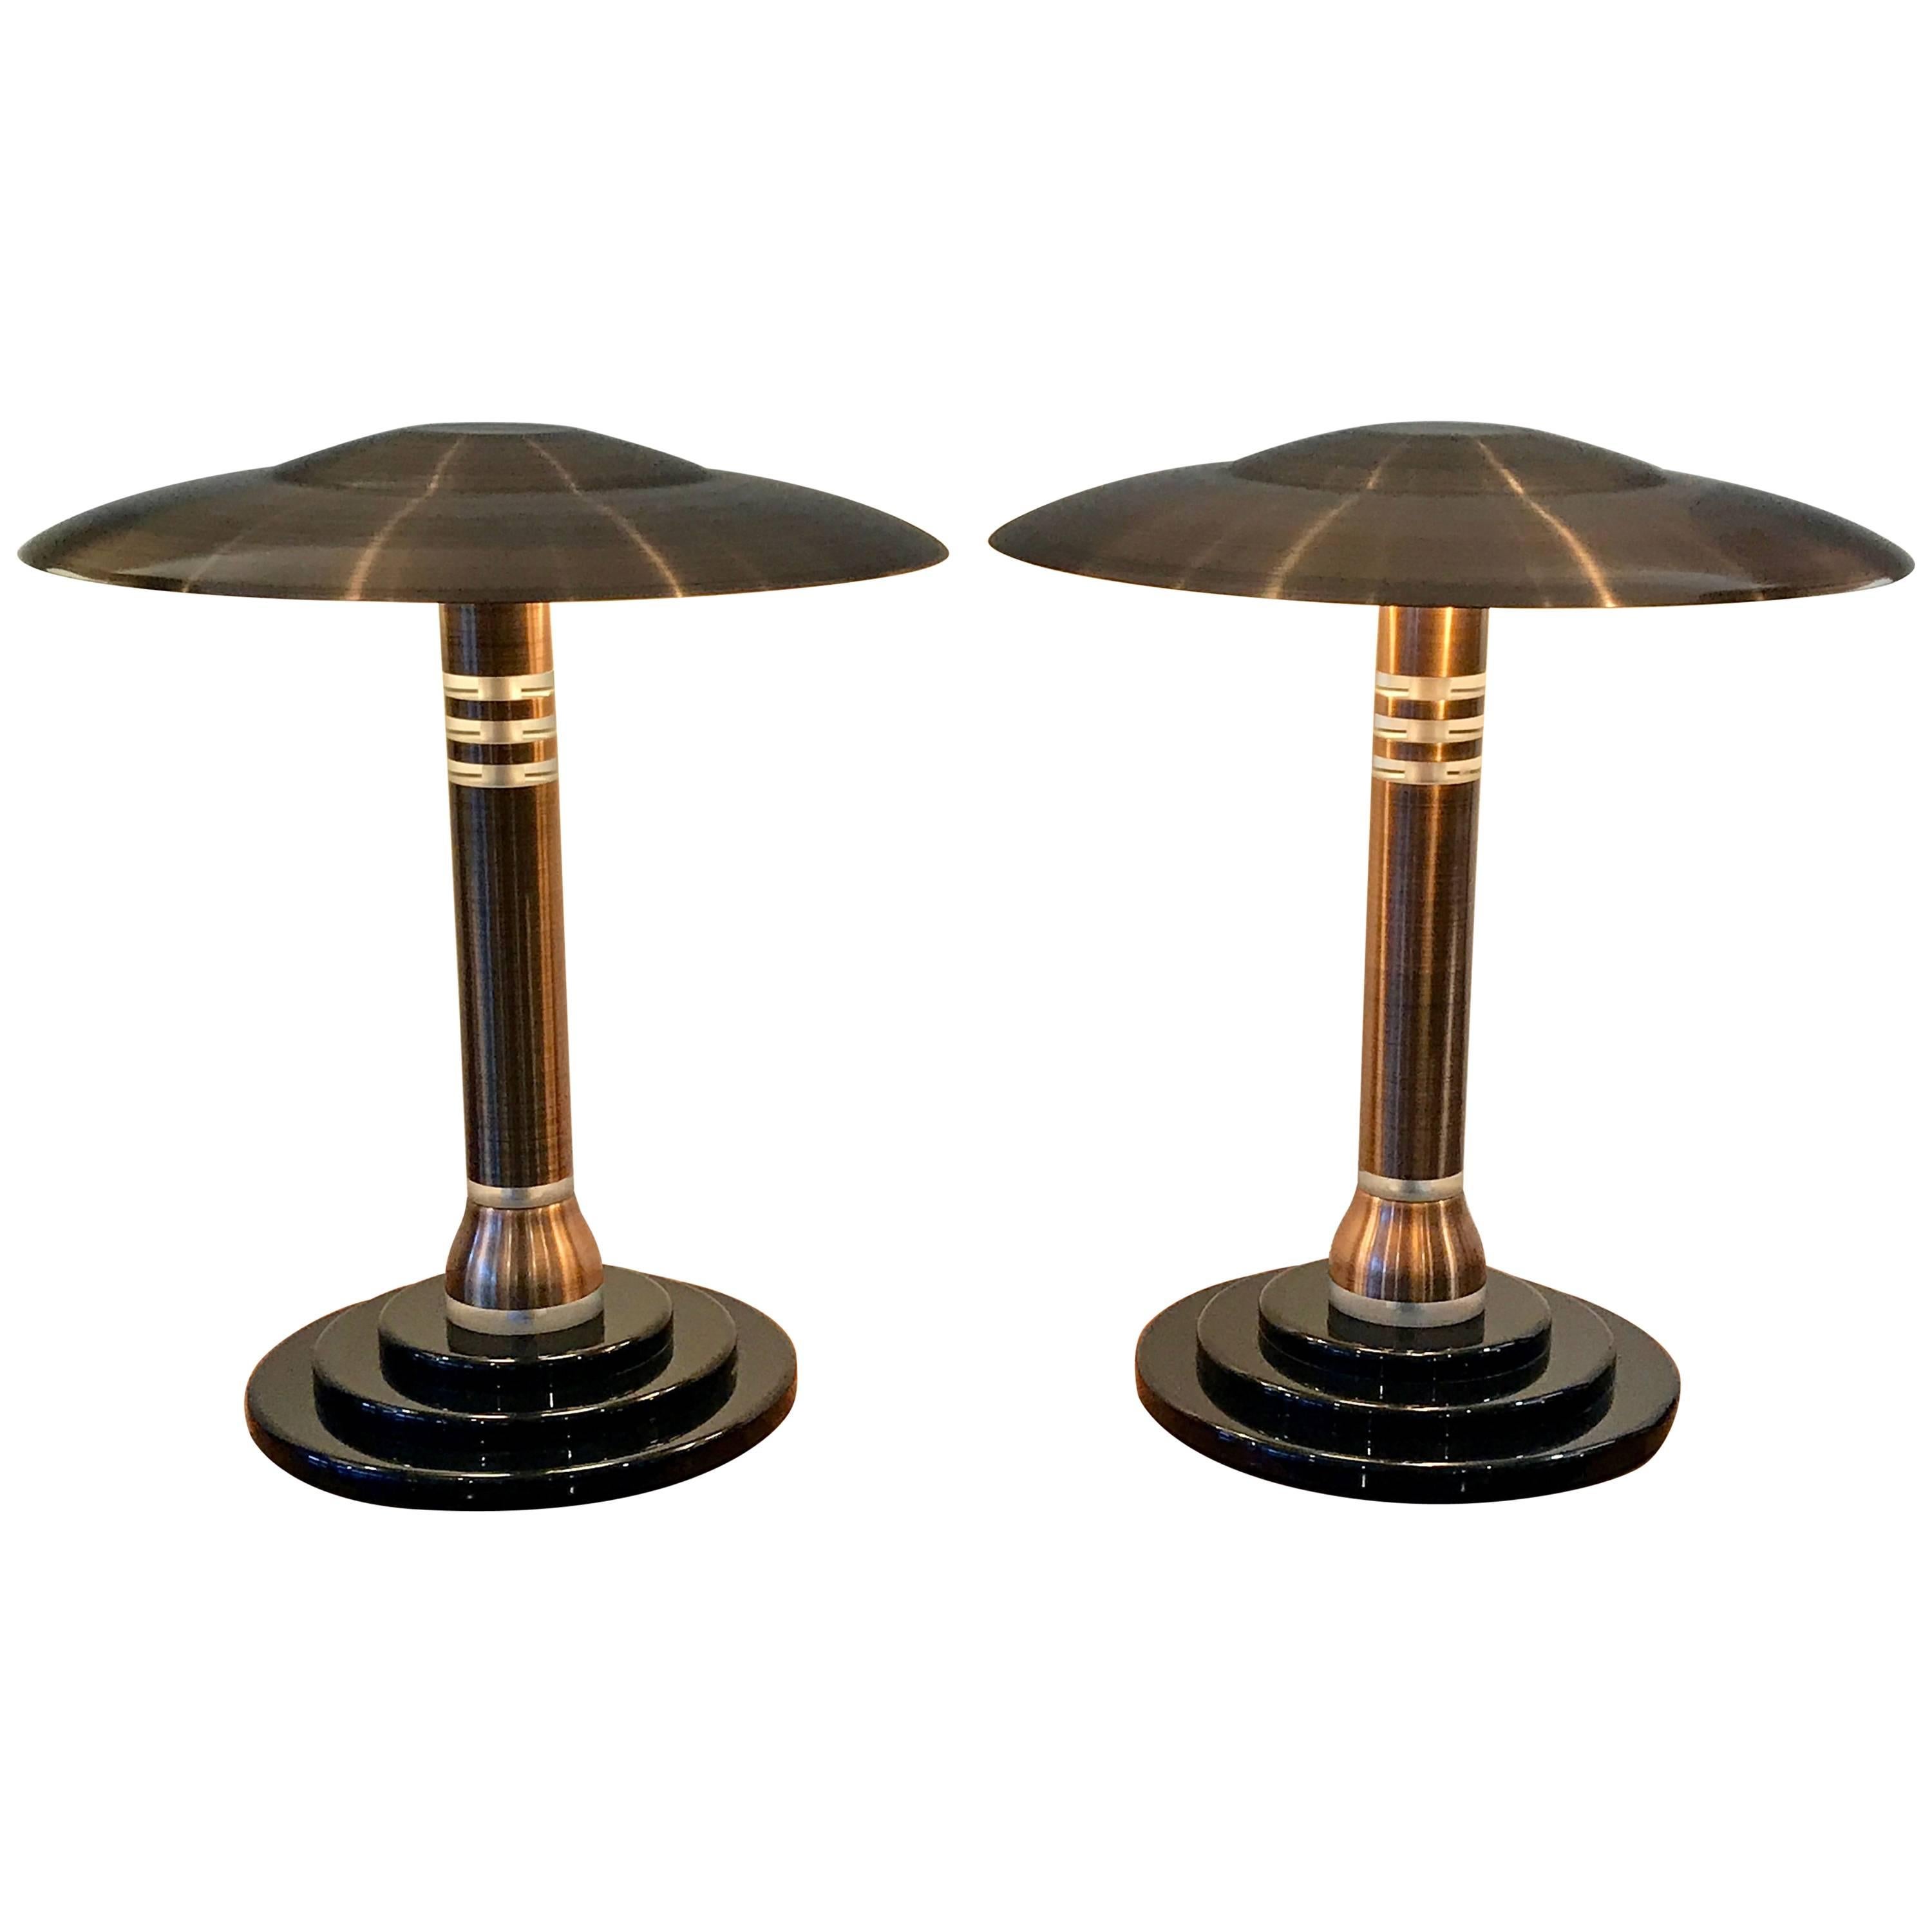 Pair Of Art Deco Style Copper And Lucite Table Lamps, 1980's